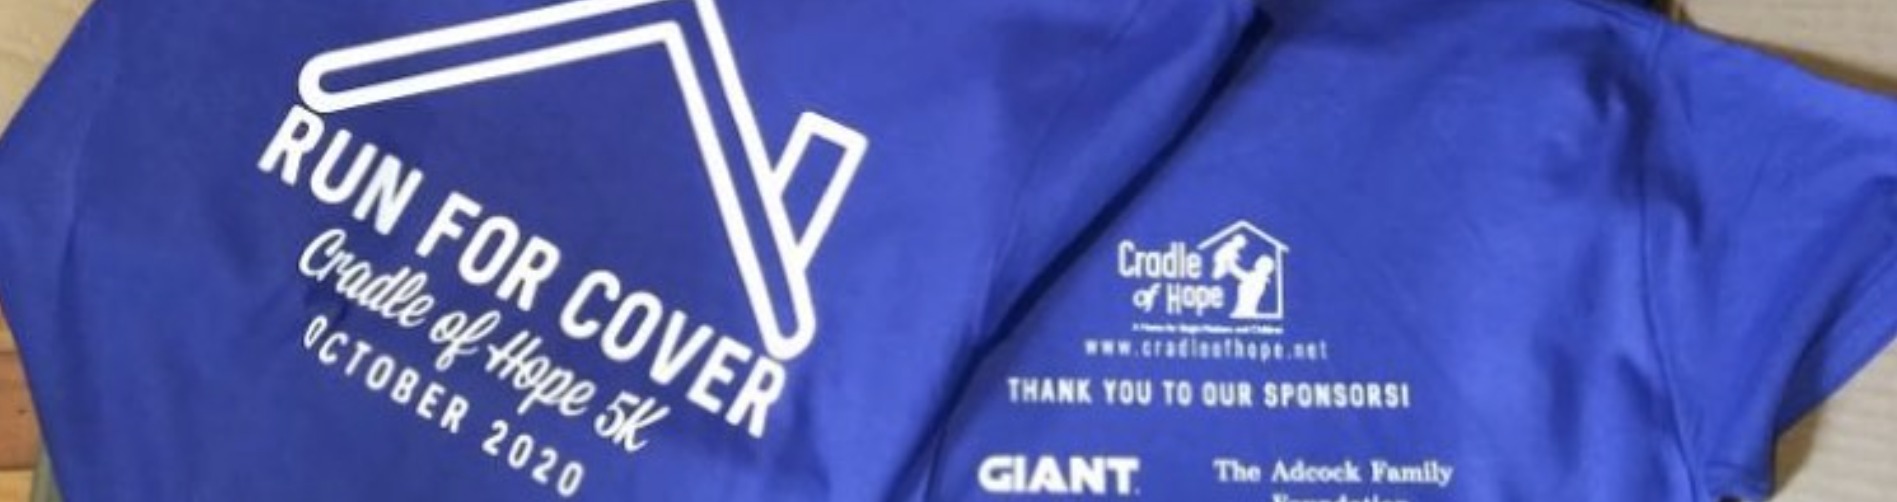 close up shot of t-shirt logo for Run For Cover Cradle of Hope 5K event